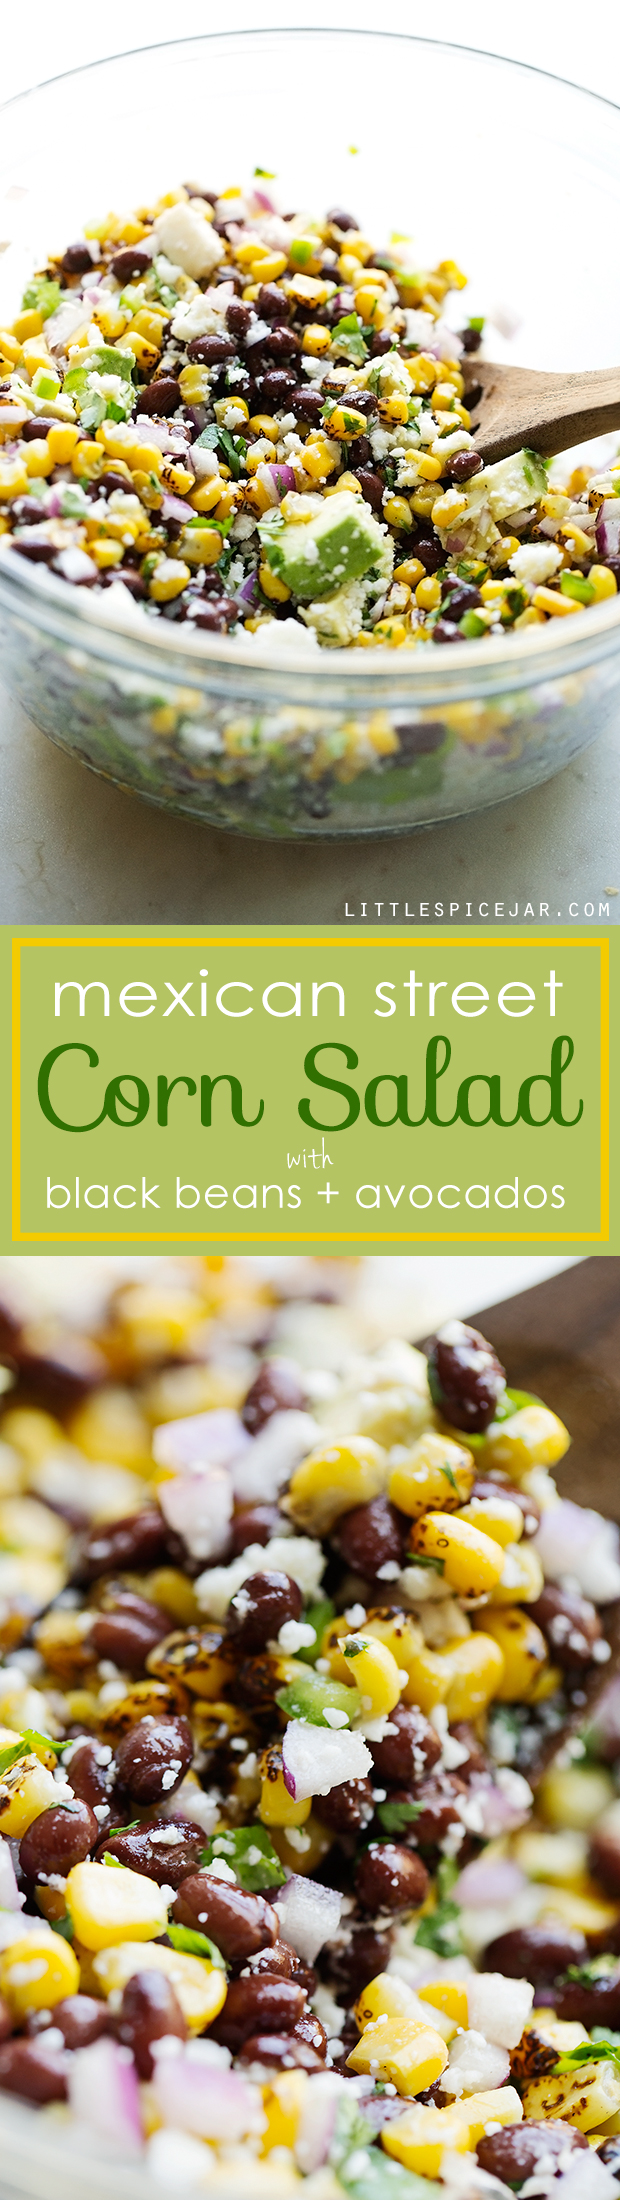 Mexican-Street-Corn-Salad-with-Black-Beans-and-Avocados-5